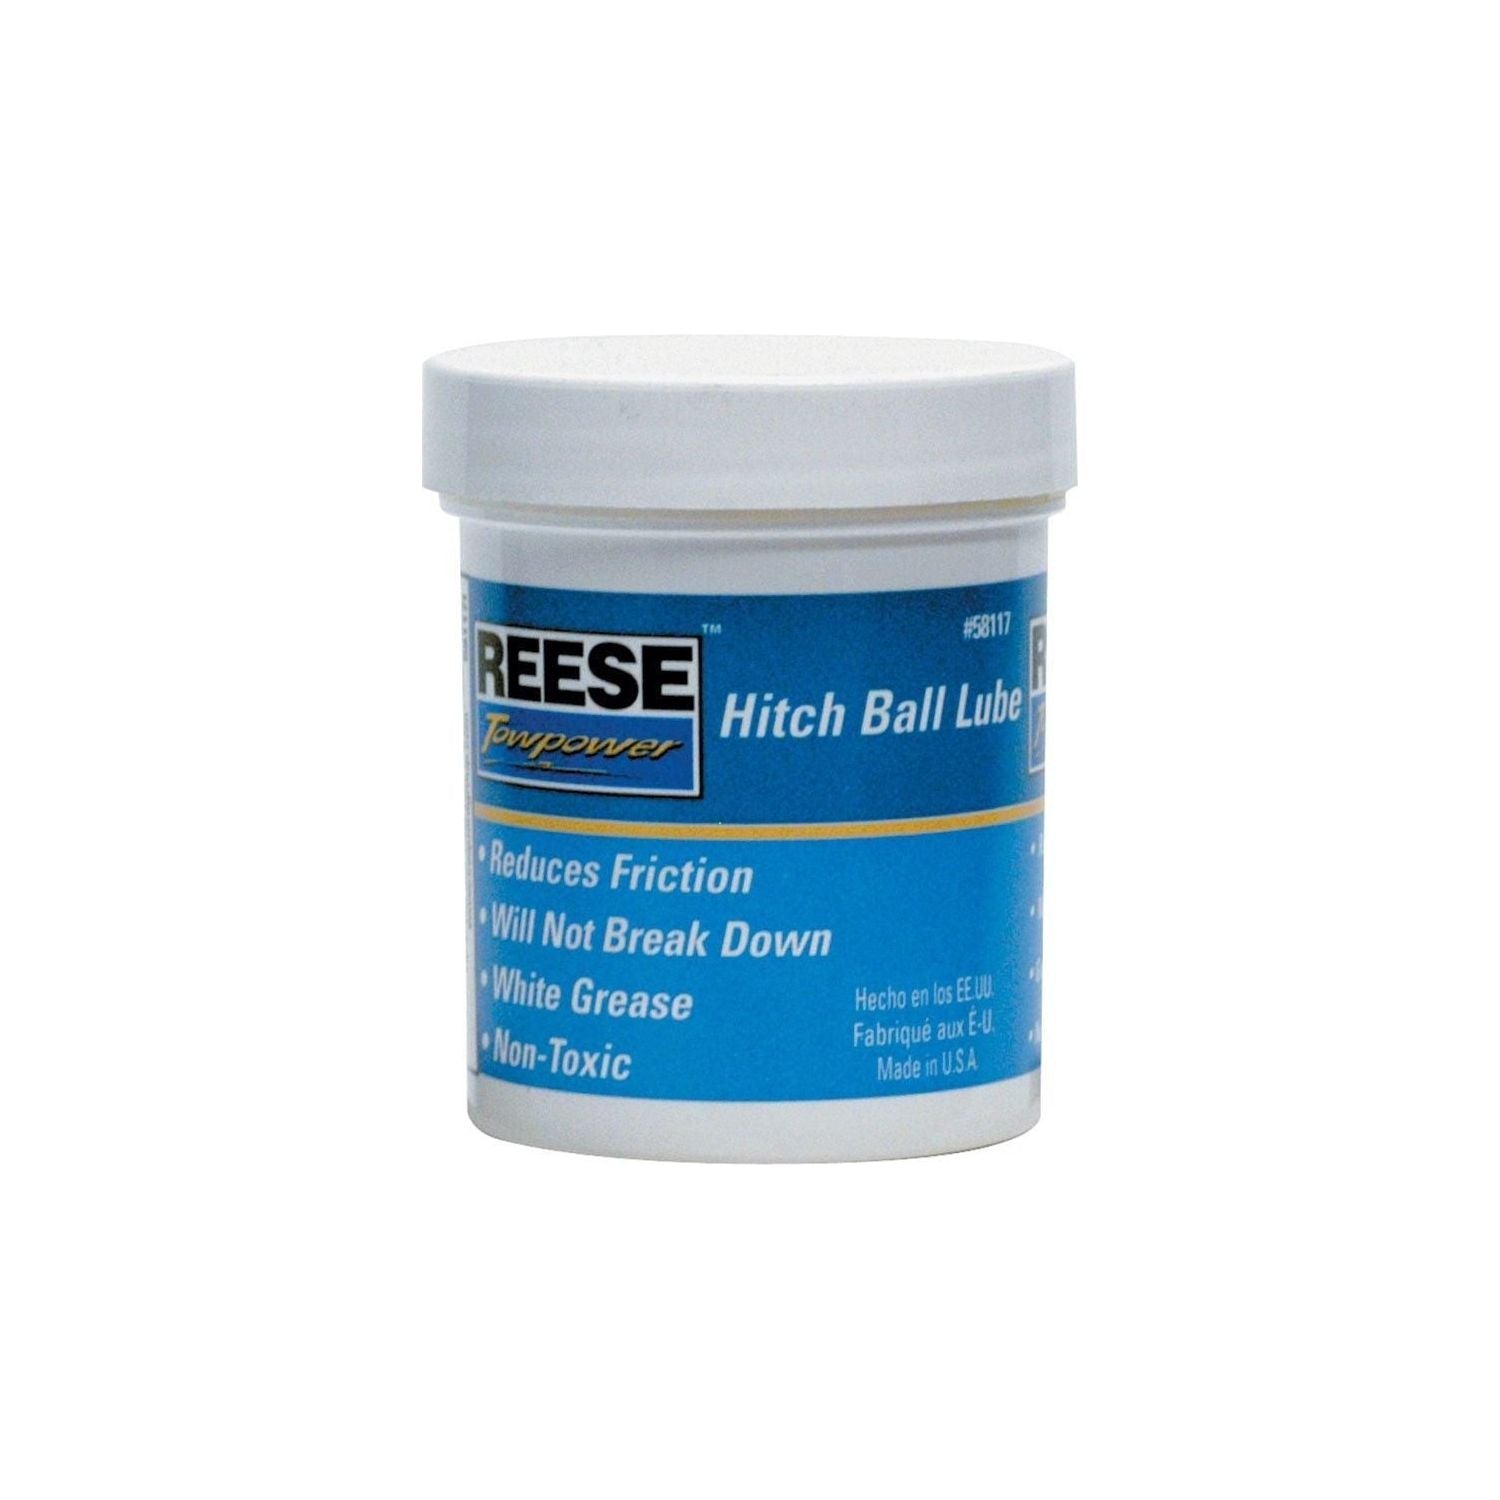 REESE 58117 - Hitch Ball Lube